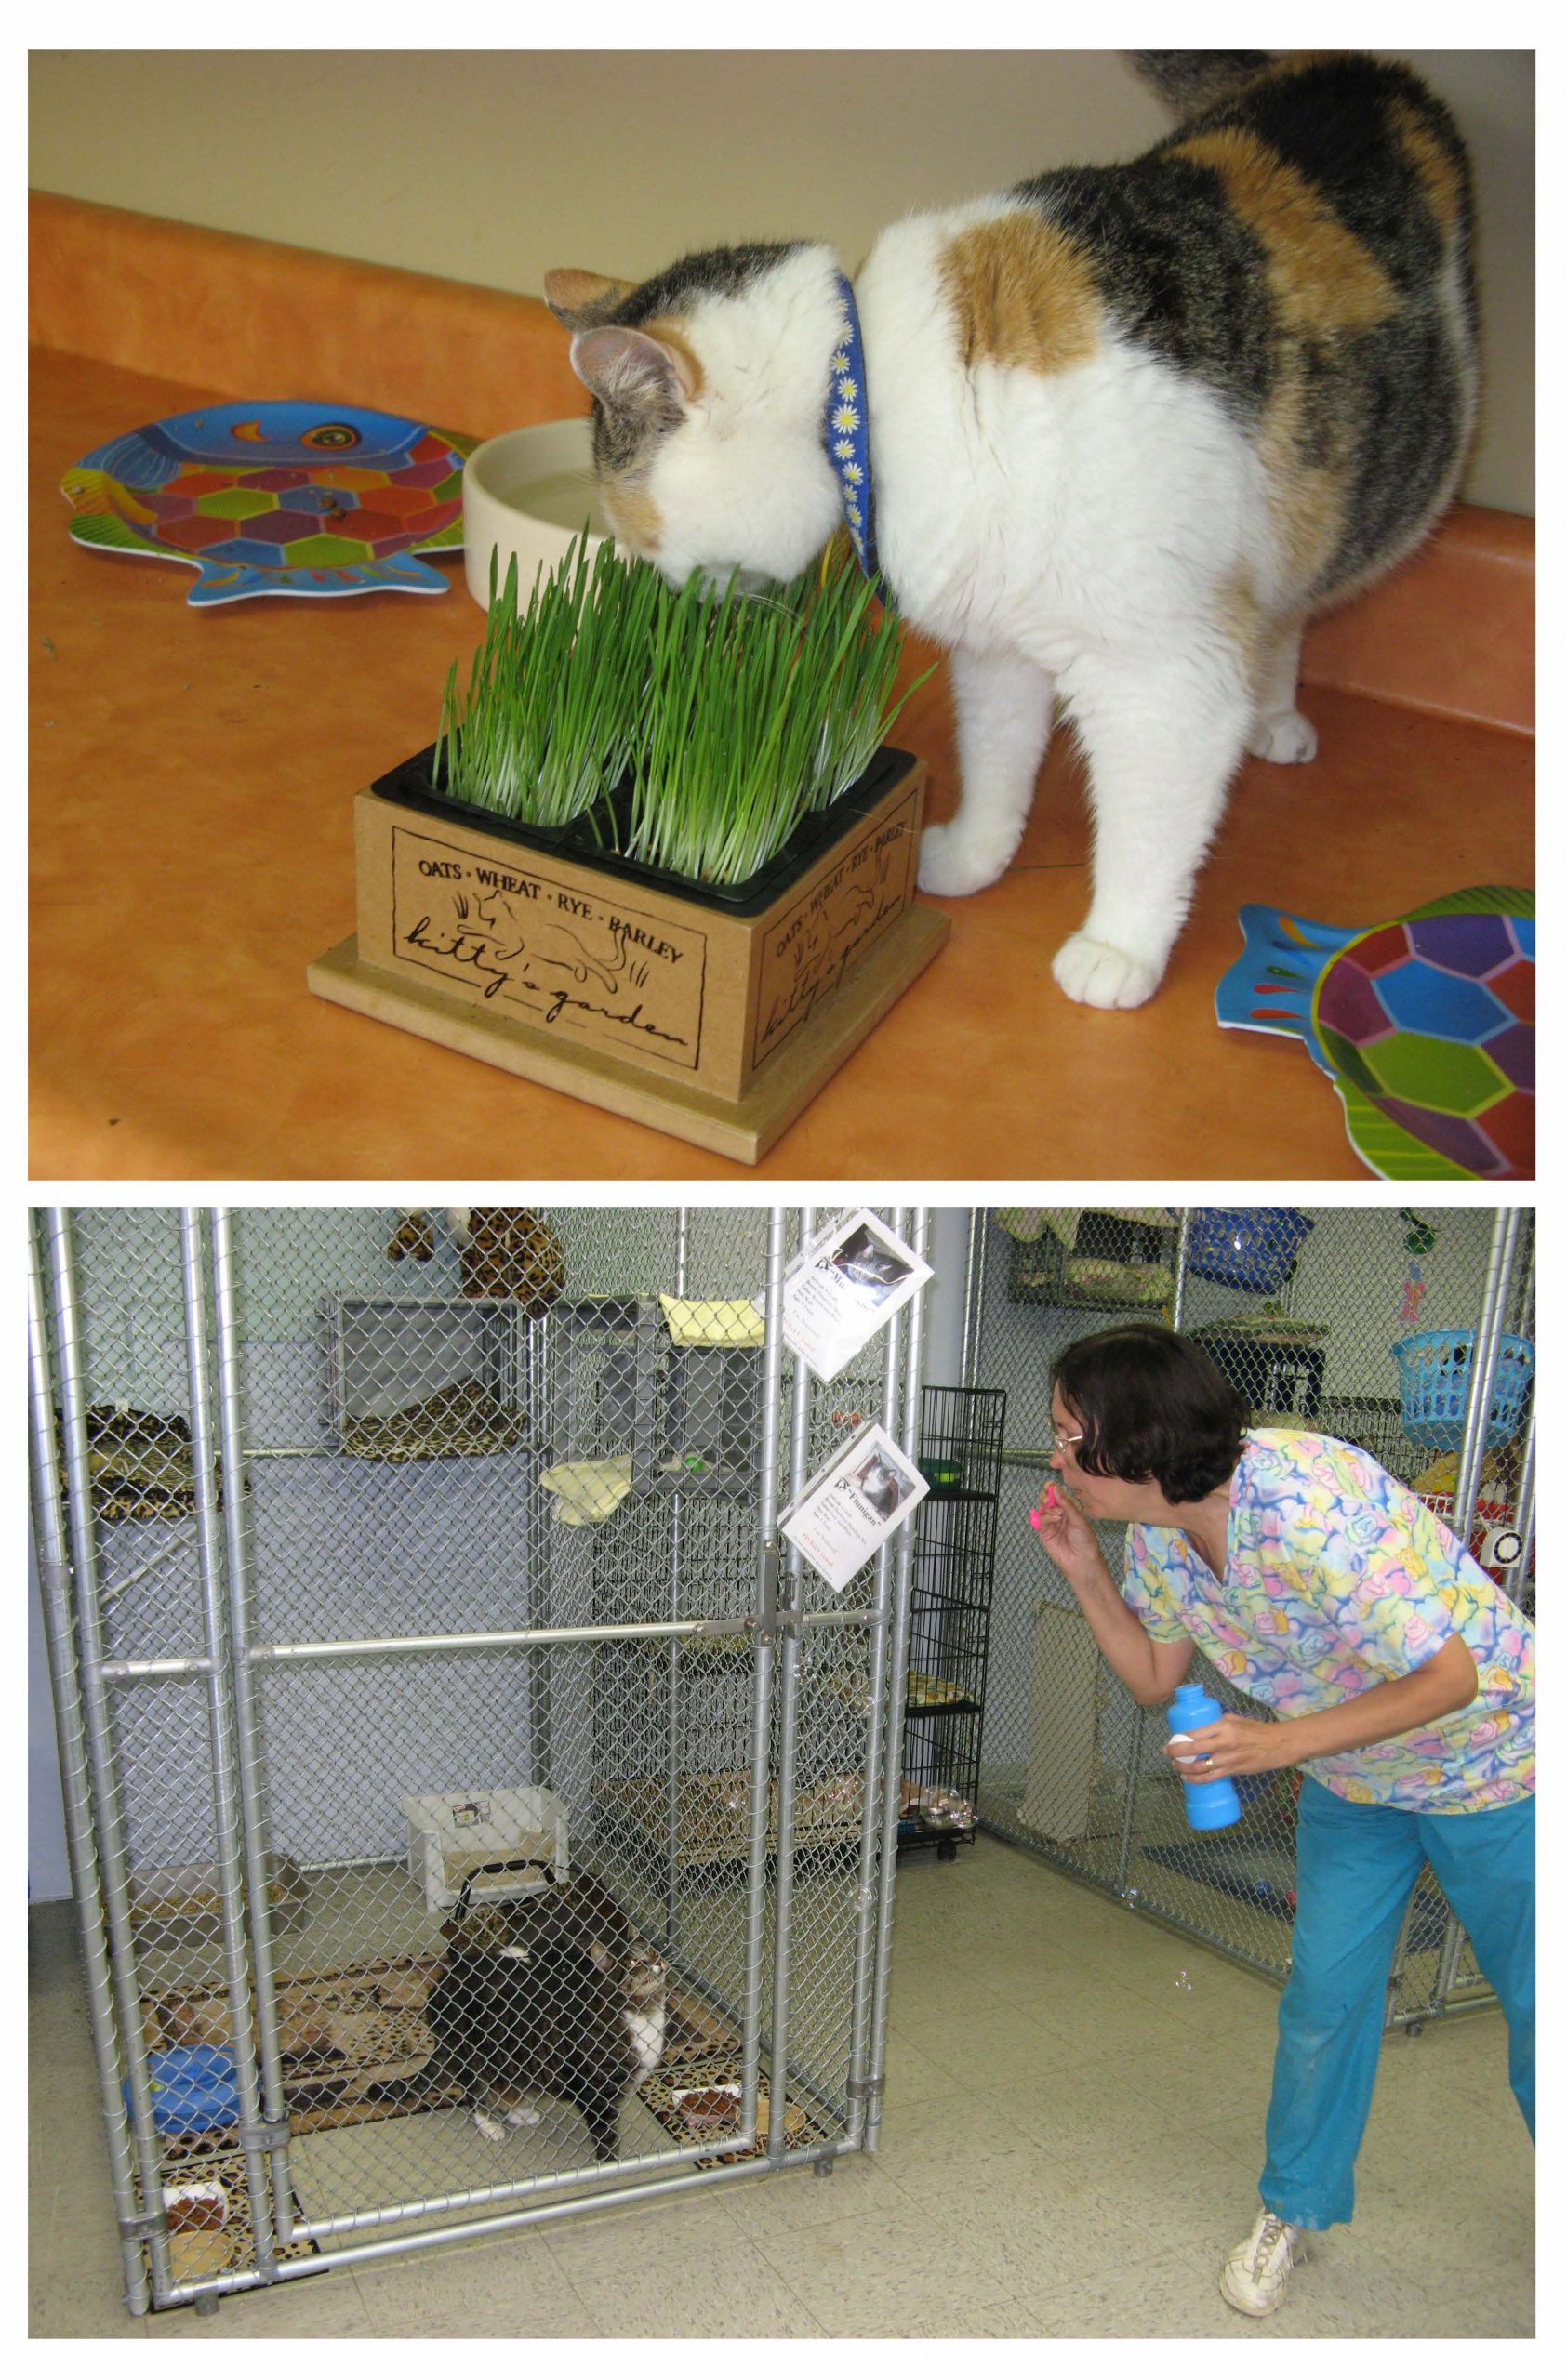 (Left) an adult cat sniffs a small container of cat grass on a counter top; (Right) an adult cat in a run watches bubbles being blown by a caregiver